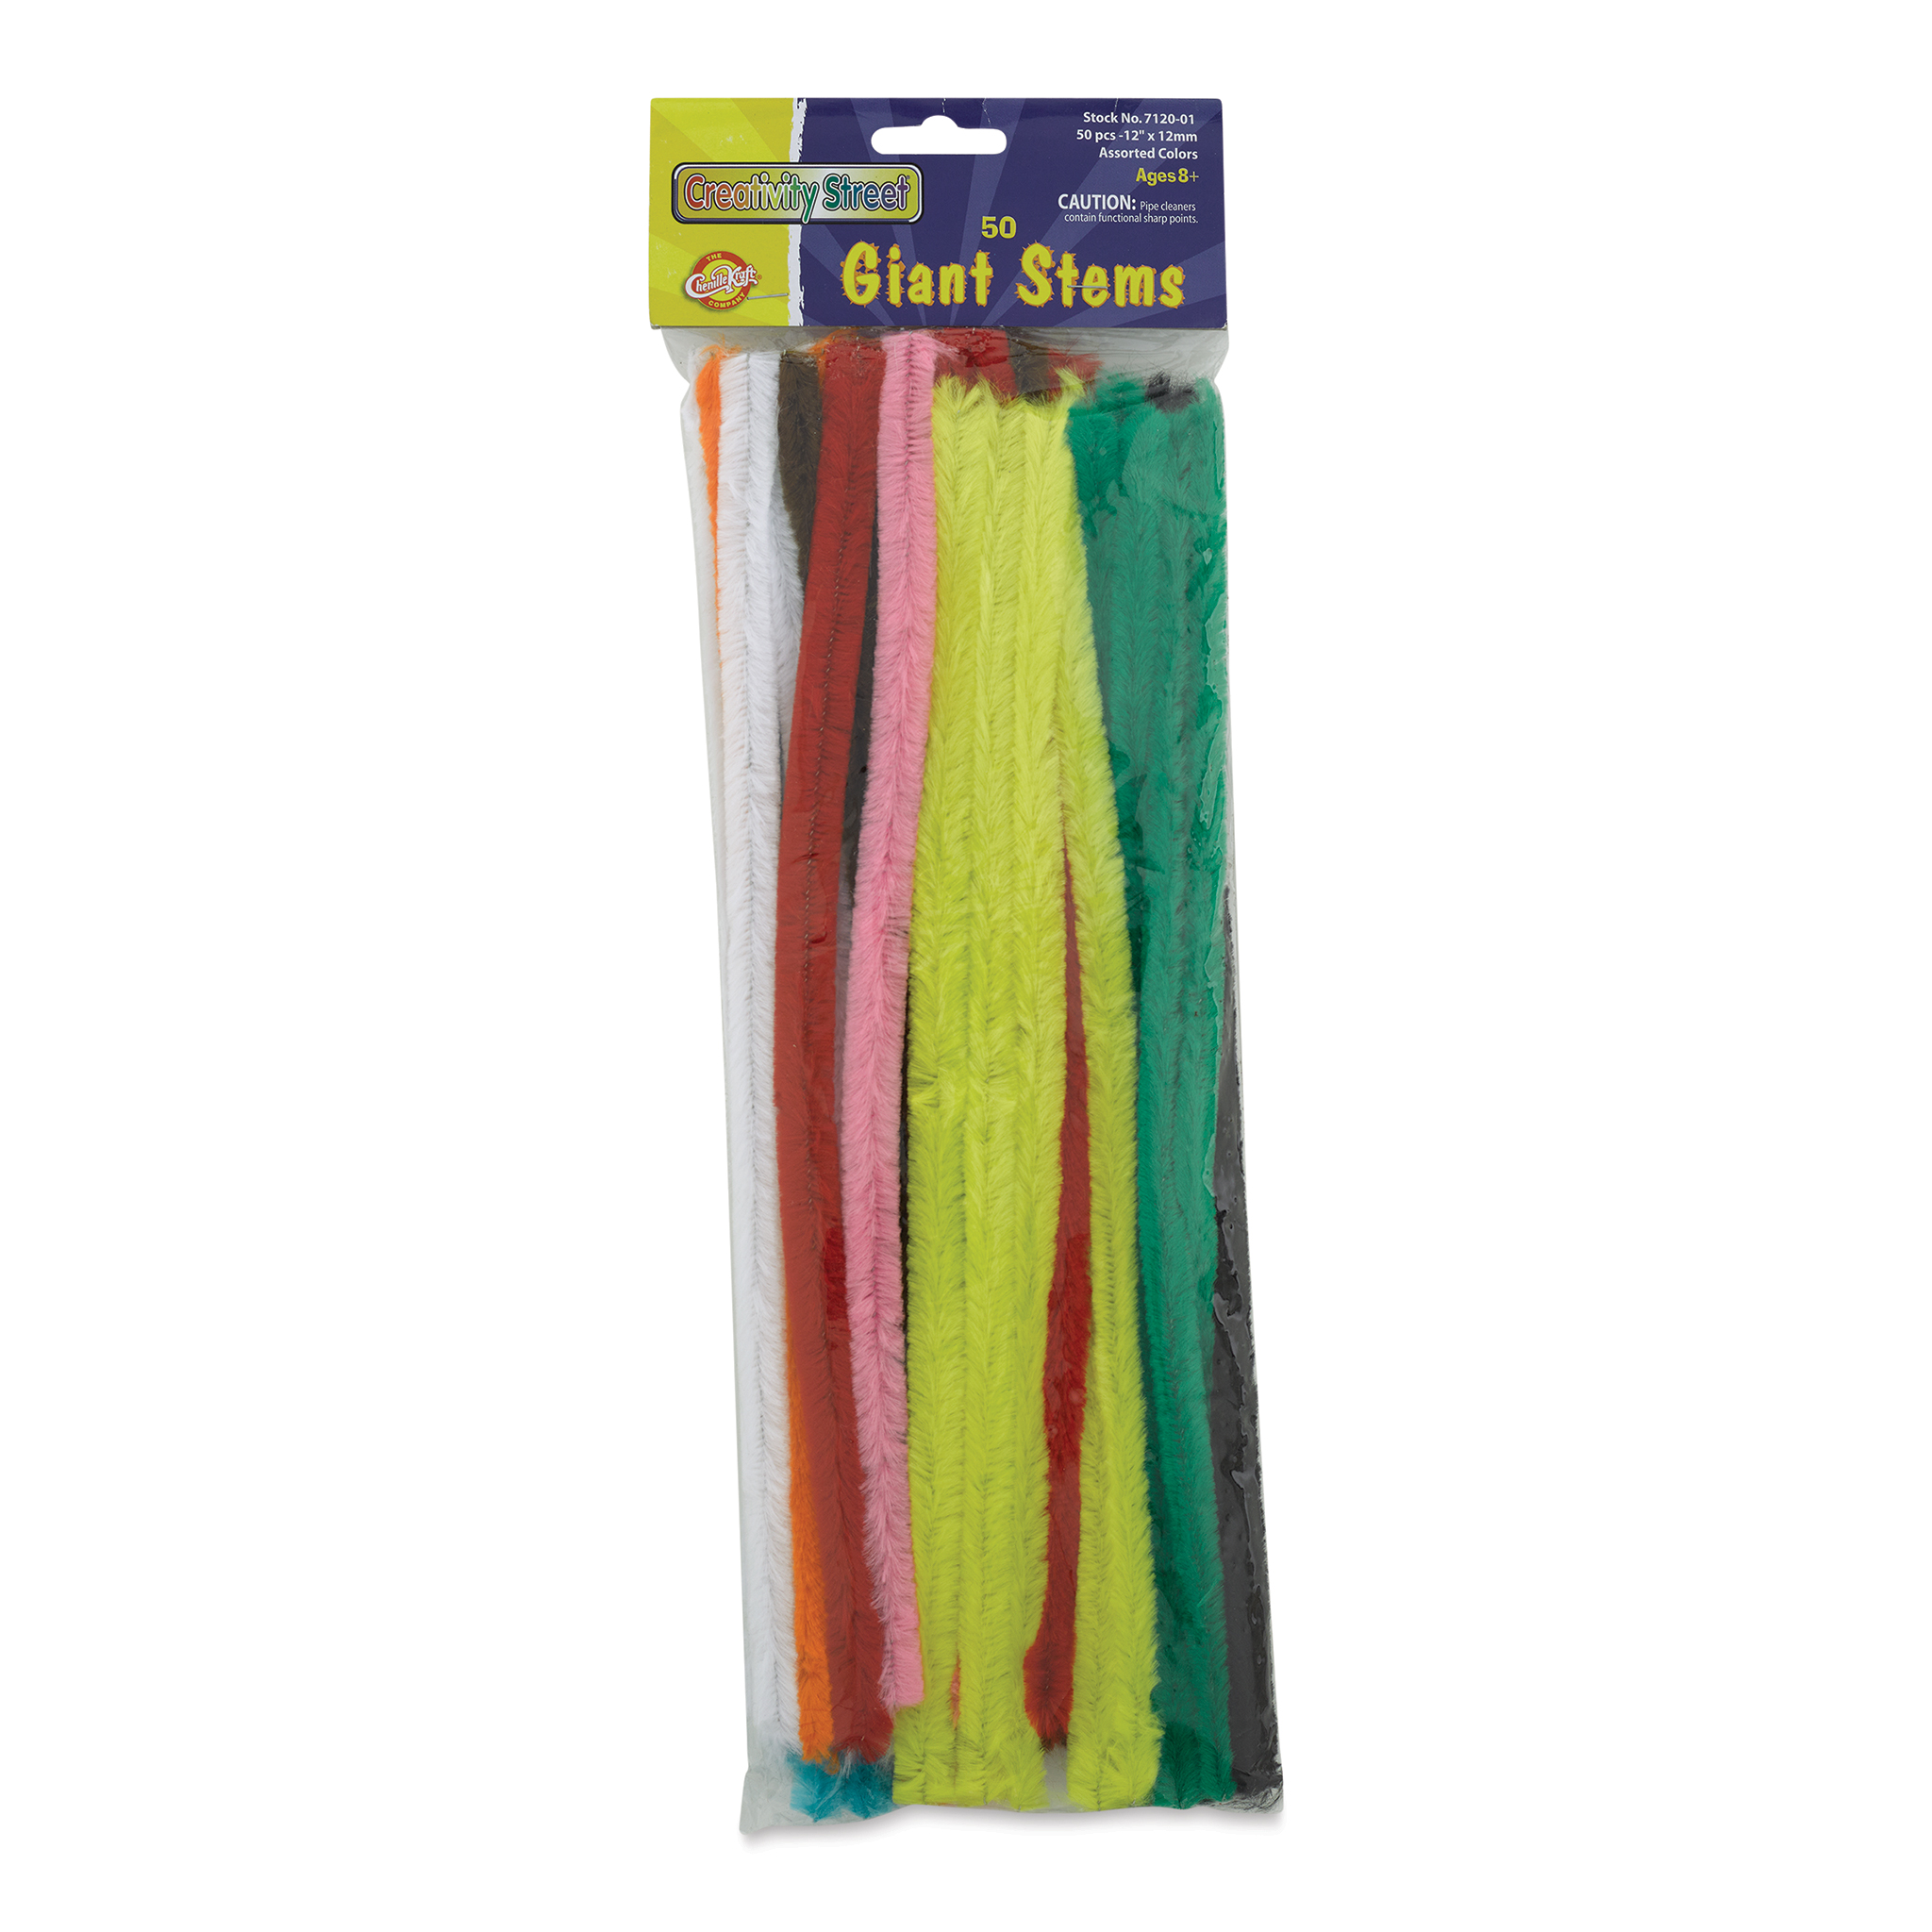 Pipe Cleaners, L: 30 cm, 6 mm, Gold, 24 pc